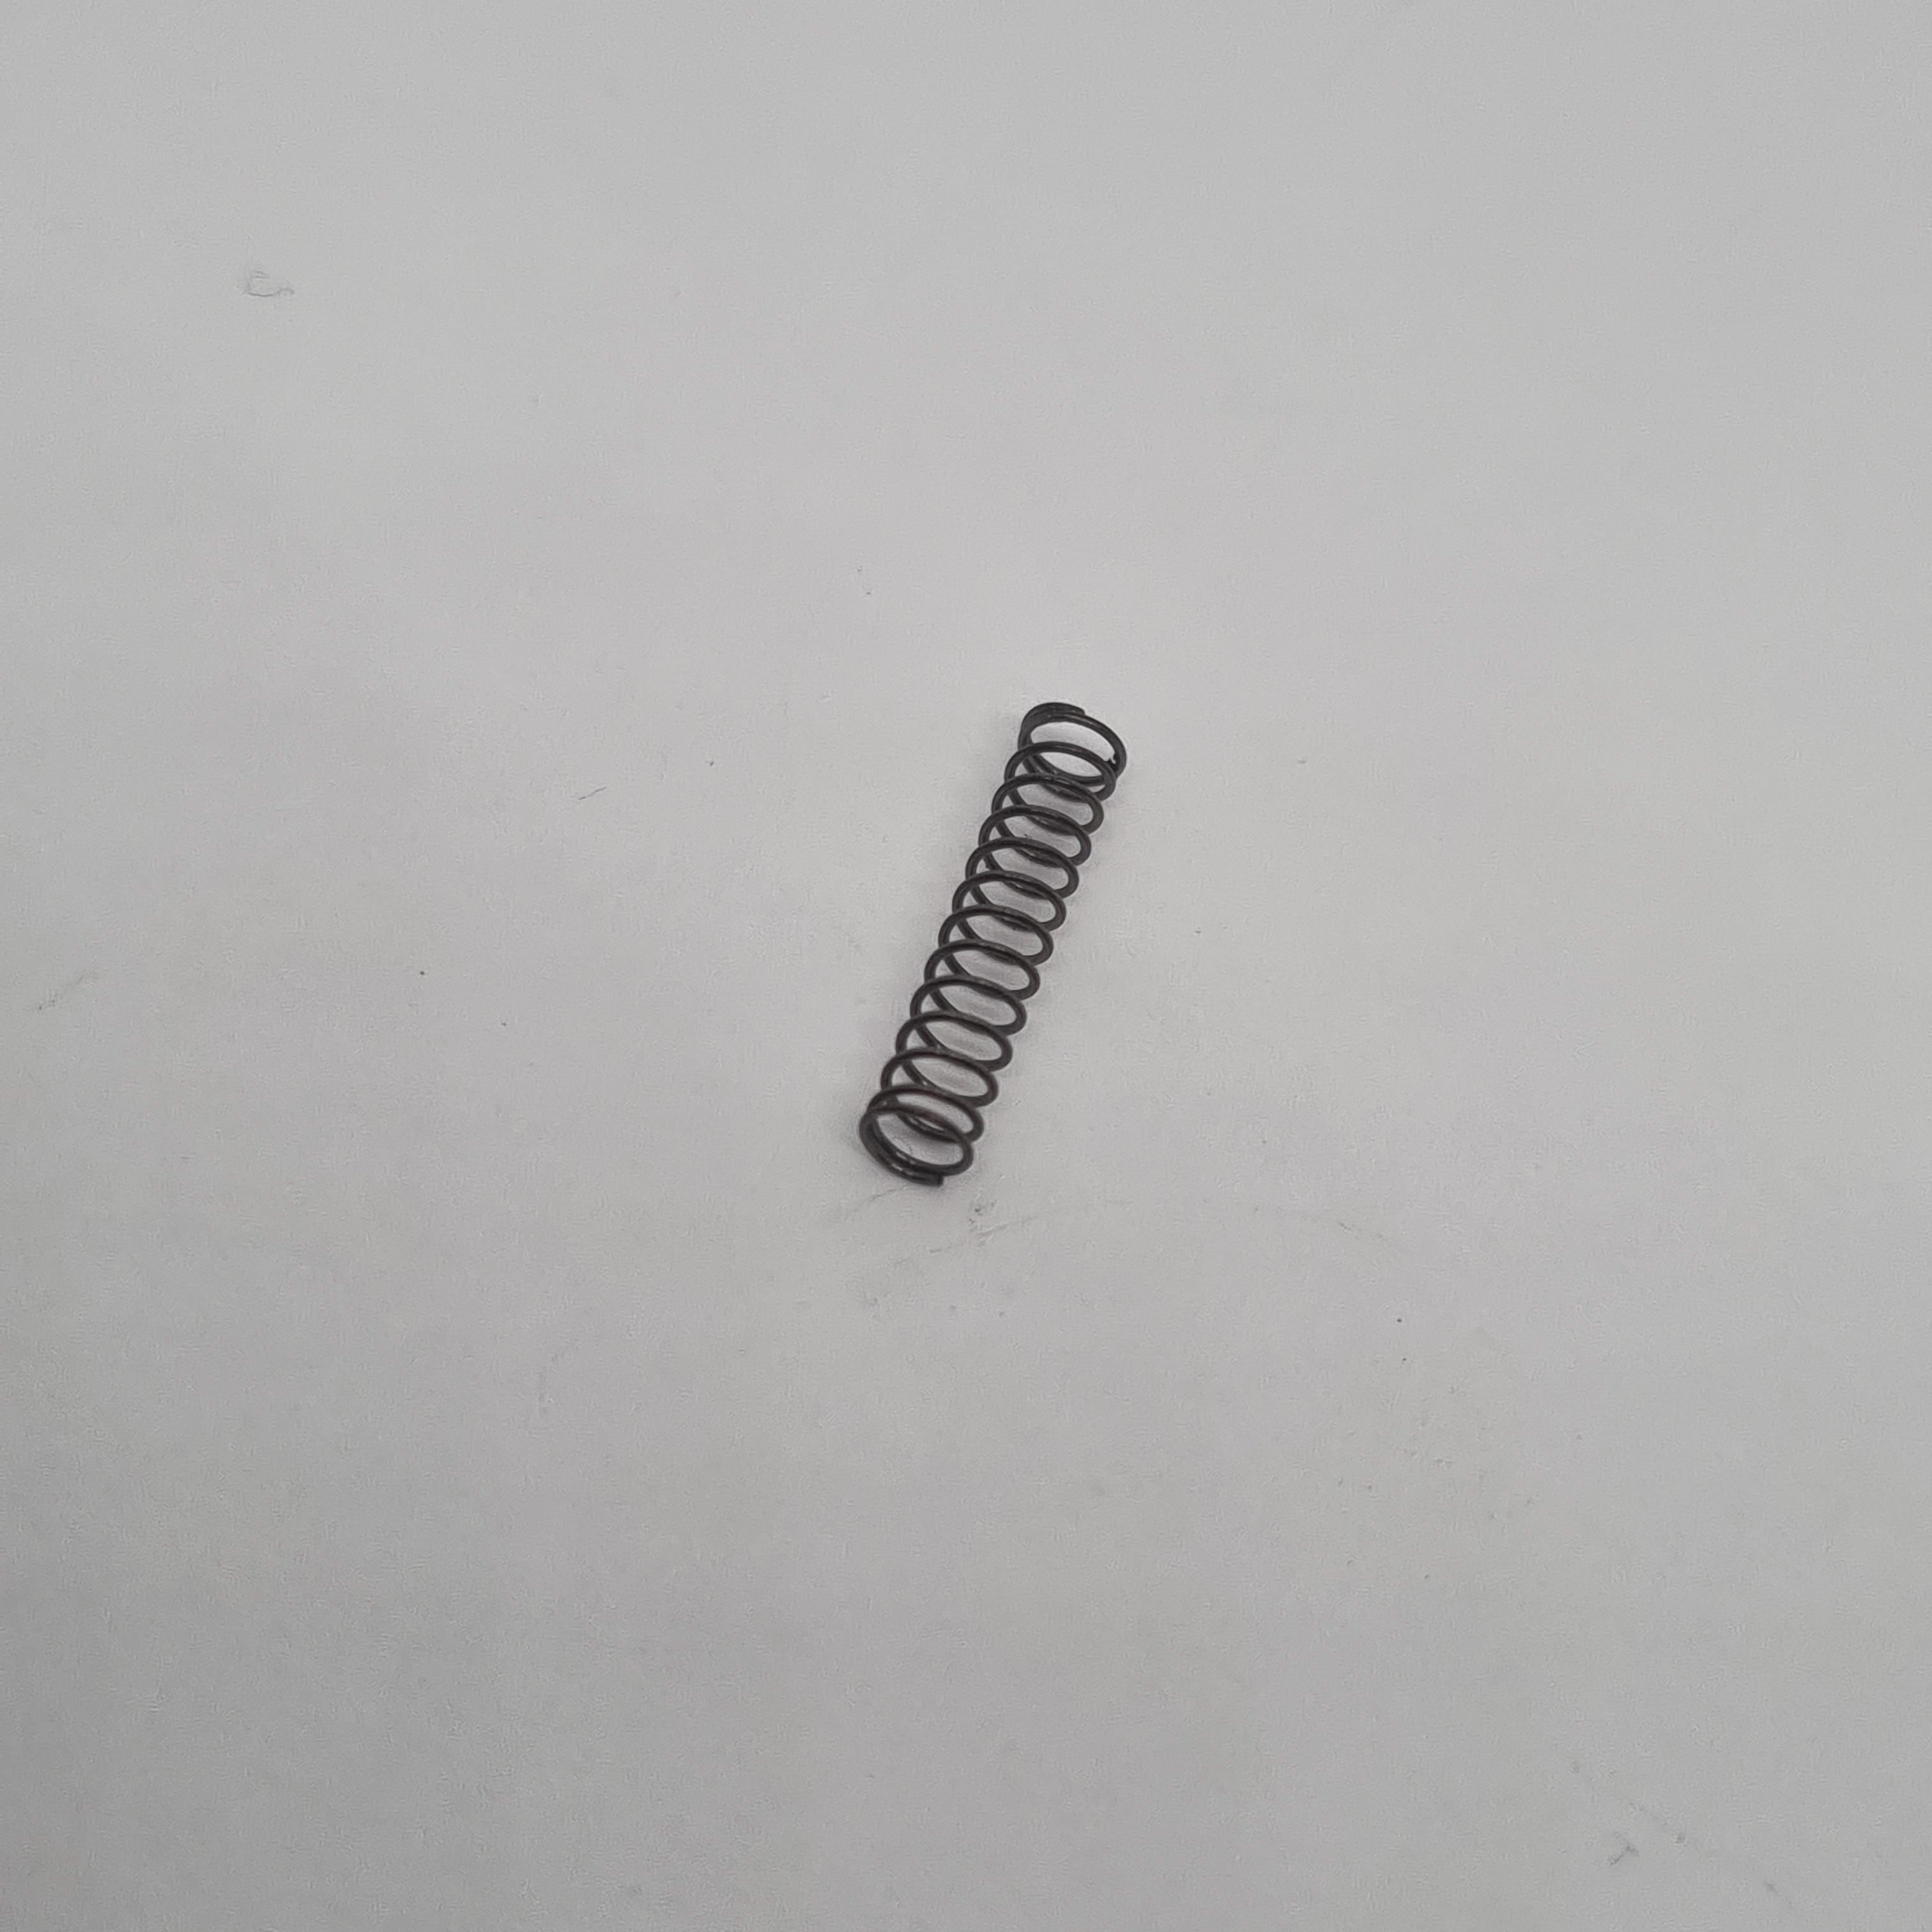 WE M92 Gen1 Replacement part 58 - Hop up Chamber Spring